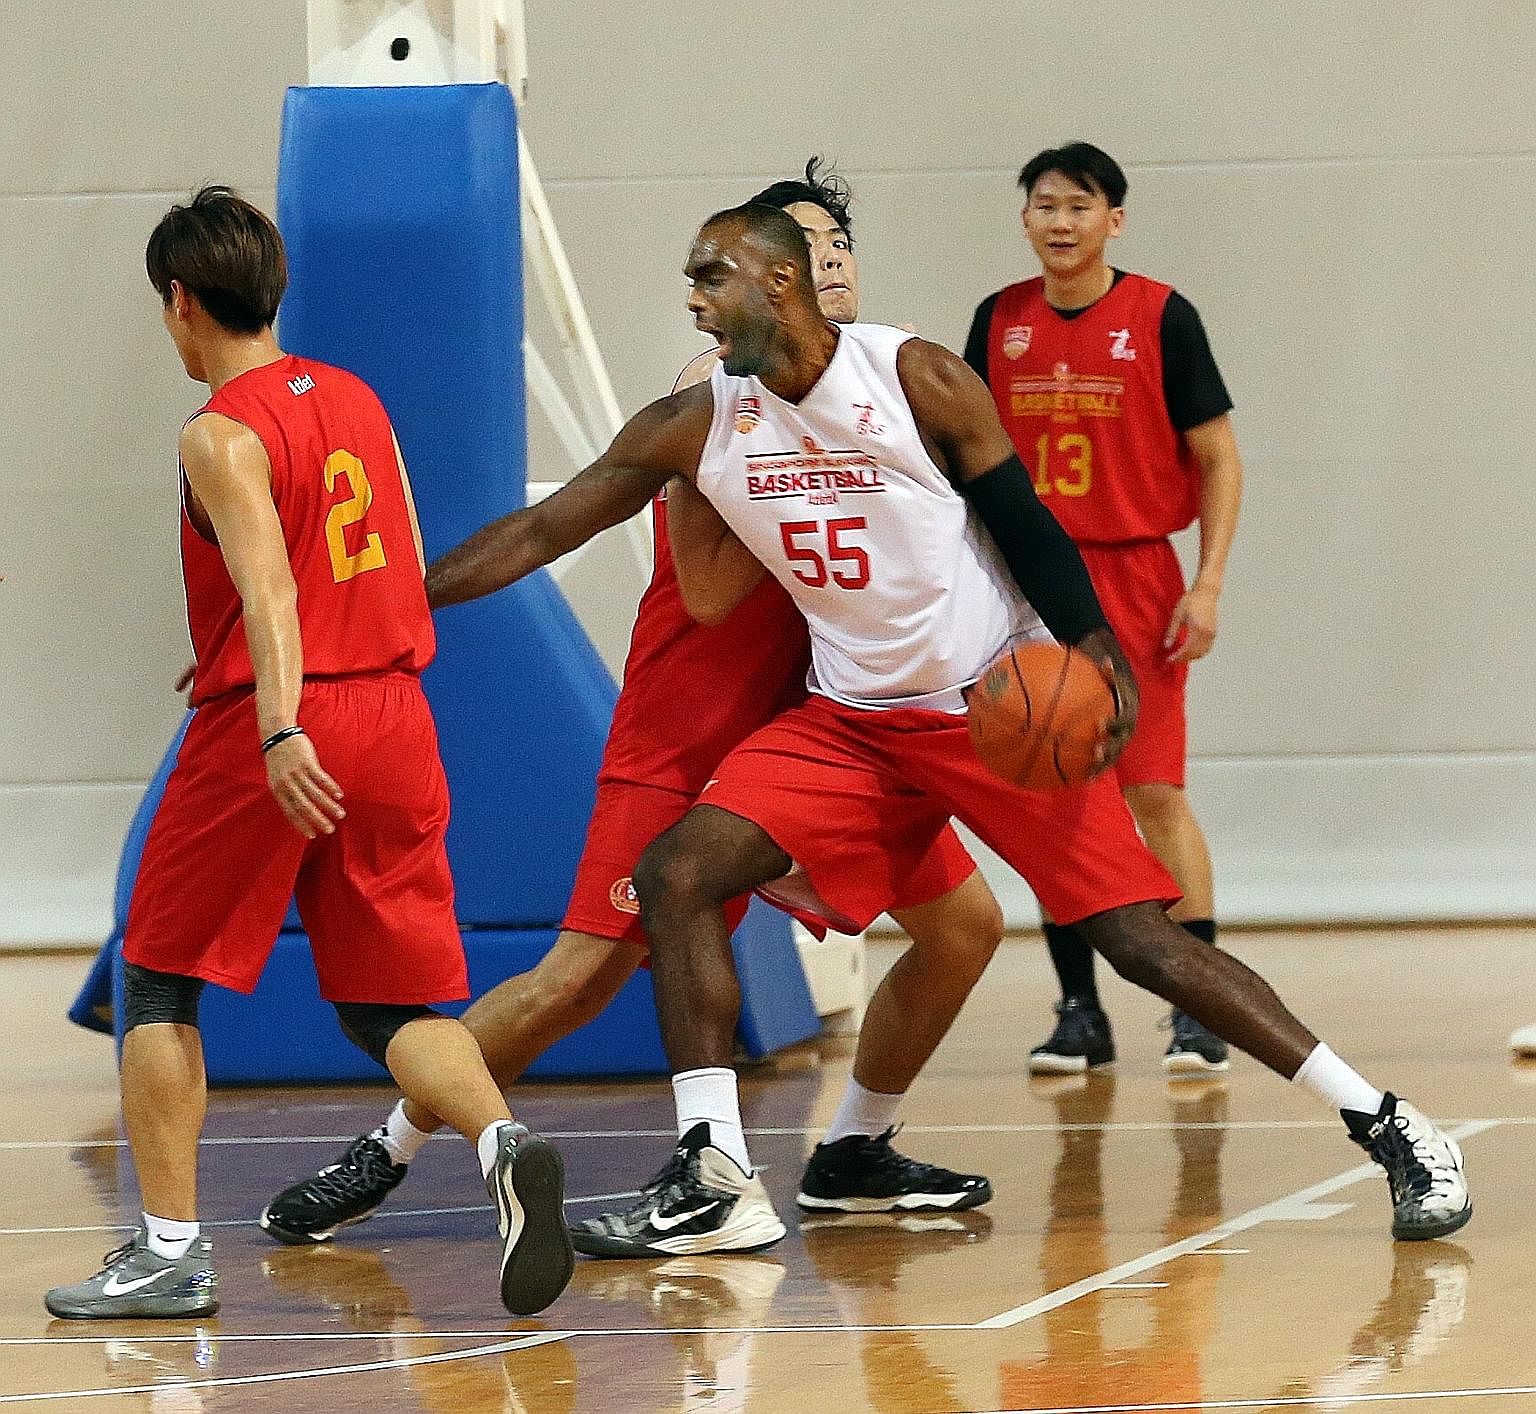 The Singapore Slingers training ahead of their best-of-three ABL semi-finals play-offs against Alab Pilipinas. They are aiming to make a second straight Finals appearance in the hope of winning their first ABL title.